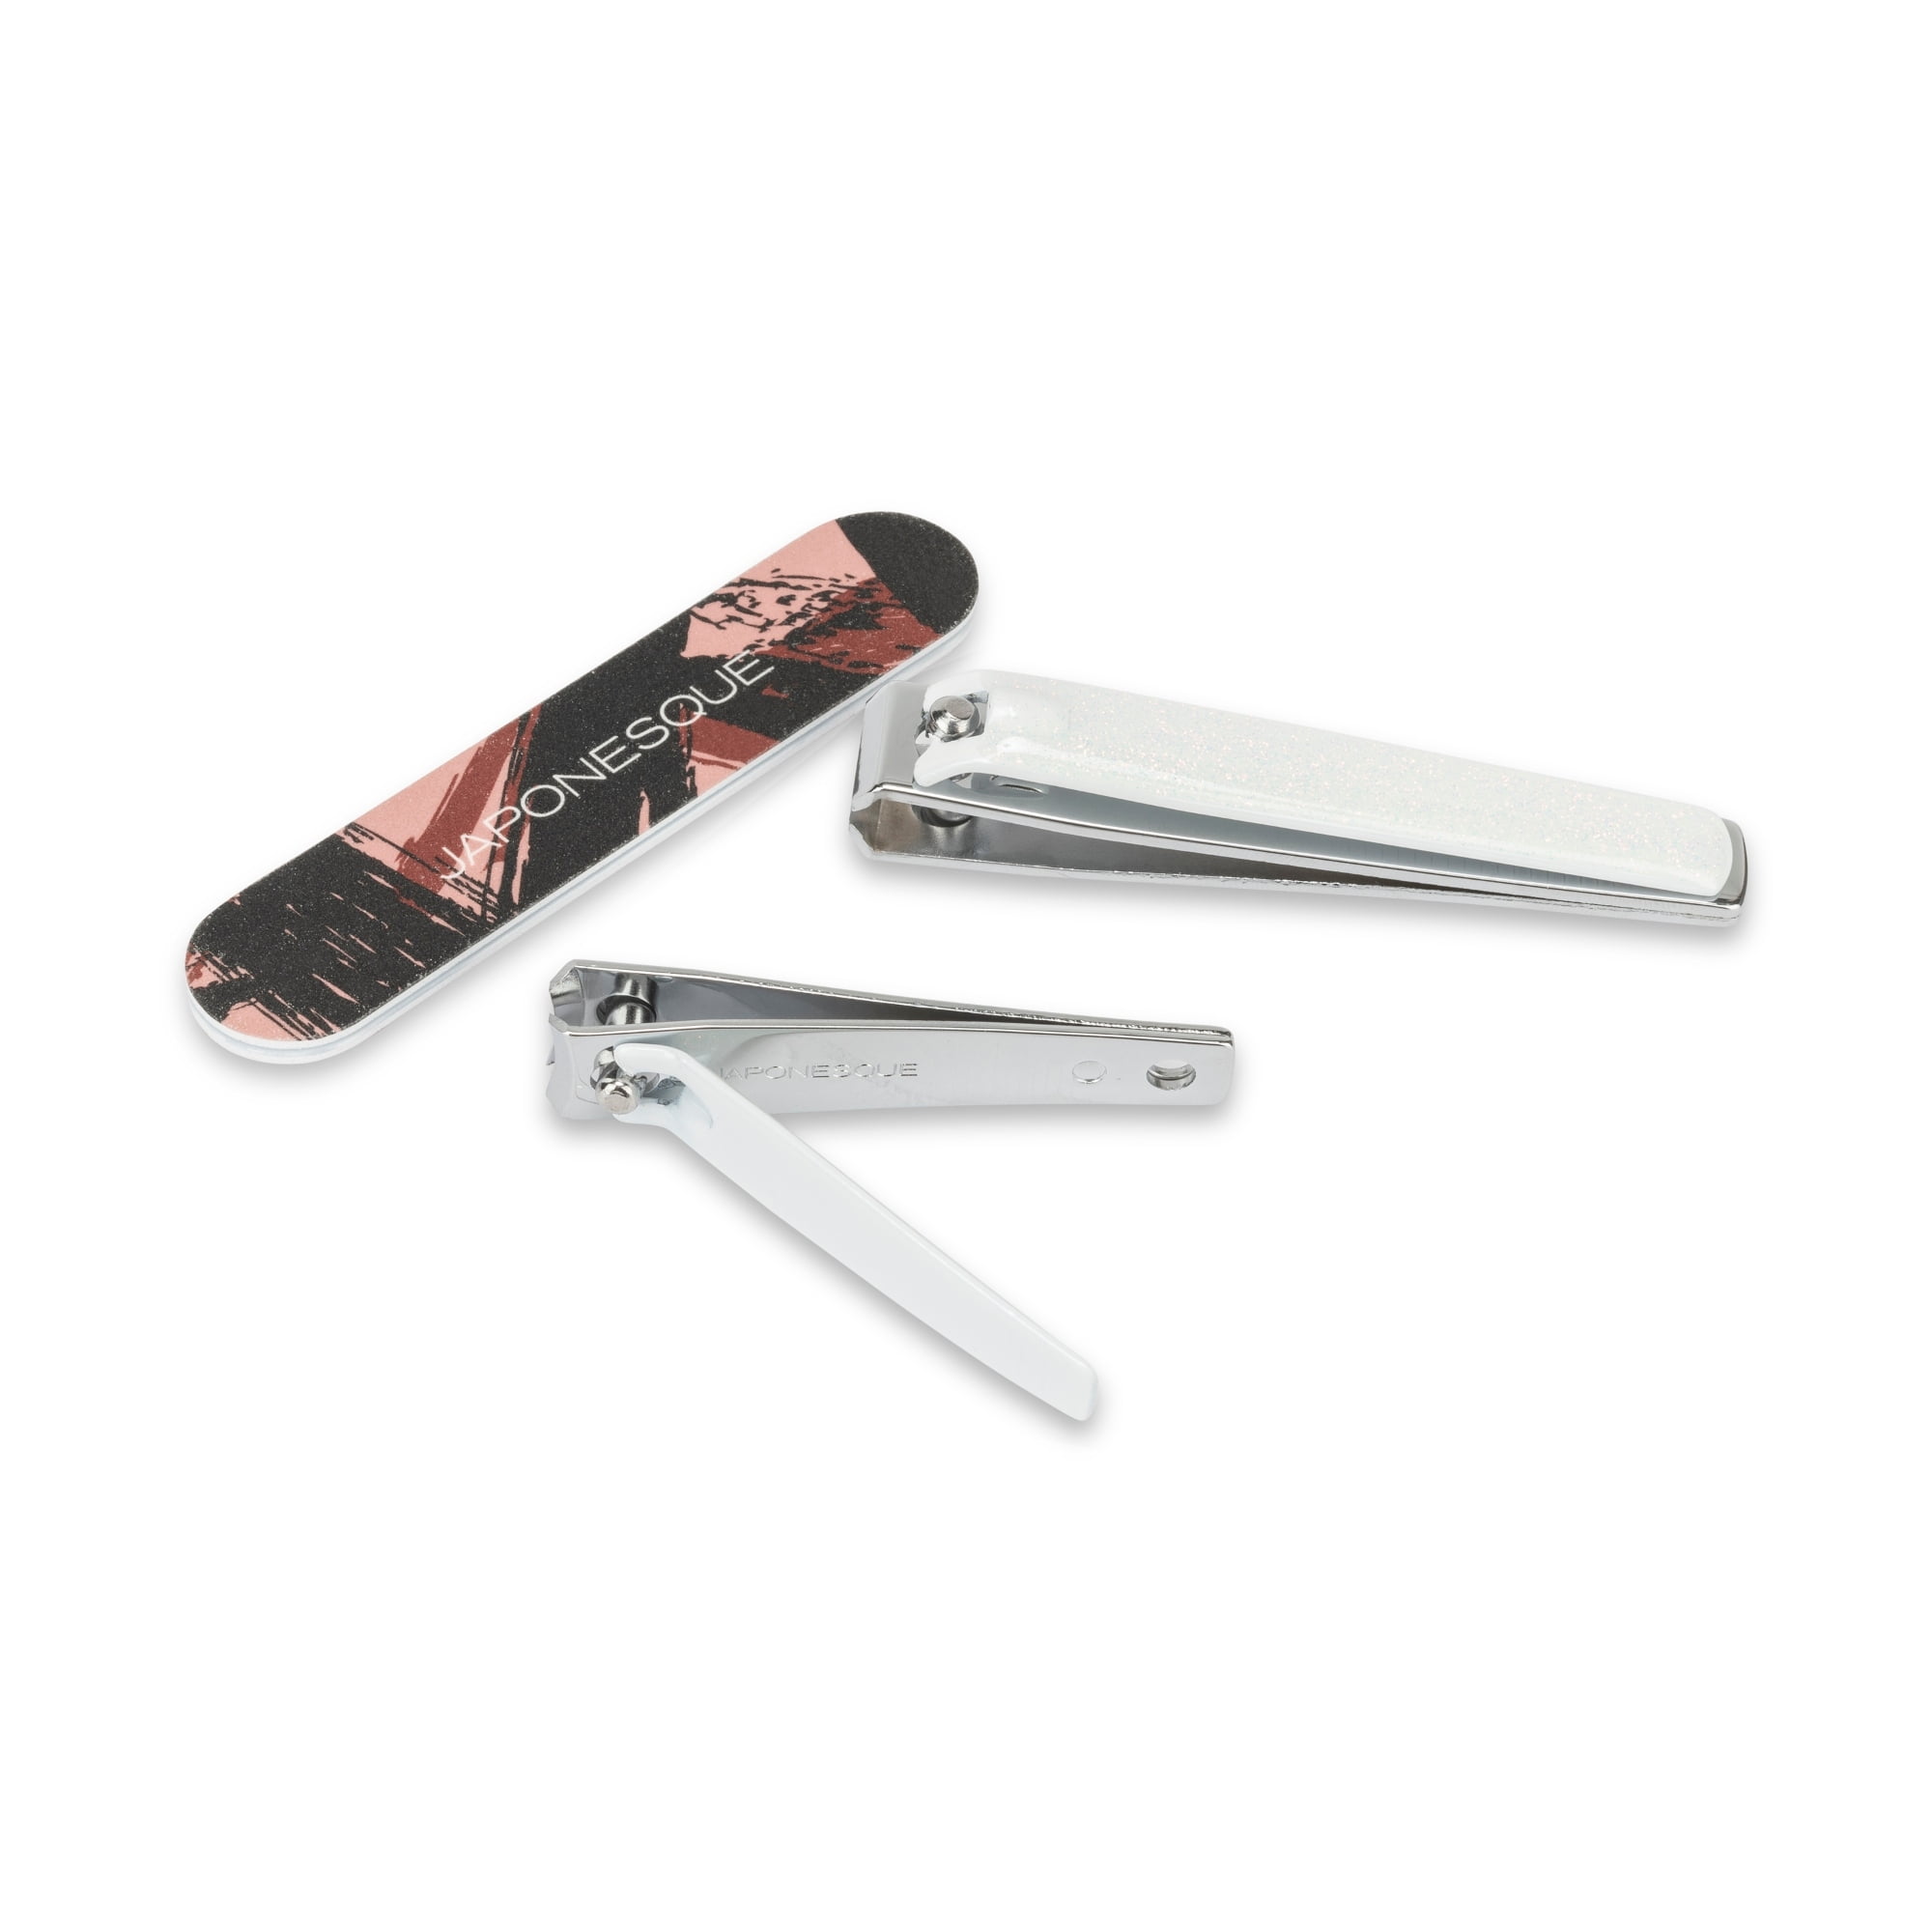 Nail Clippers - Nail Clippers with Emery Boards, 3-pc. Kit - 4 Sets  -  Walmart.com